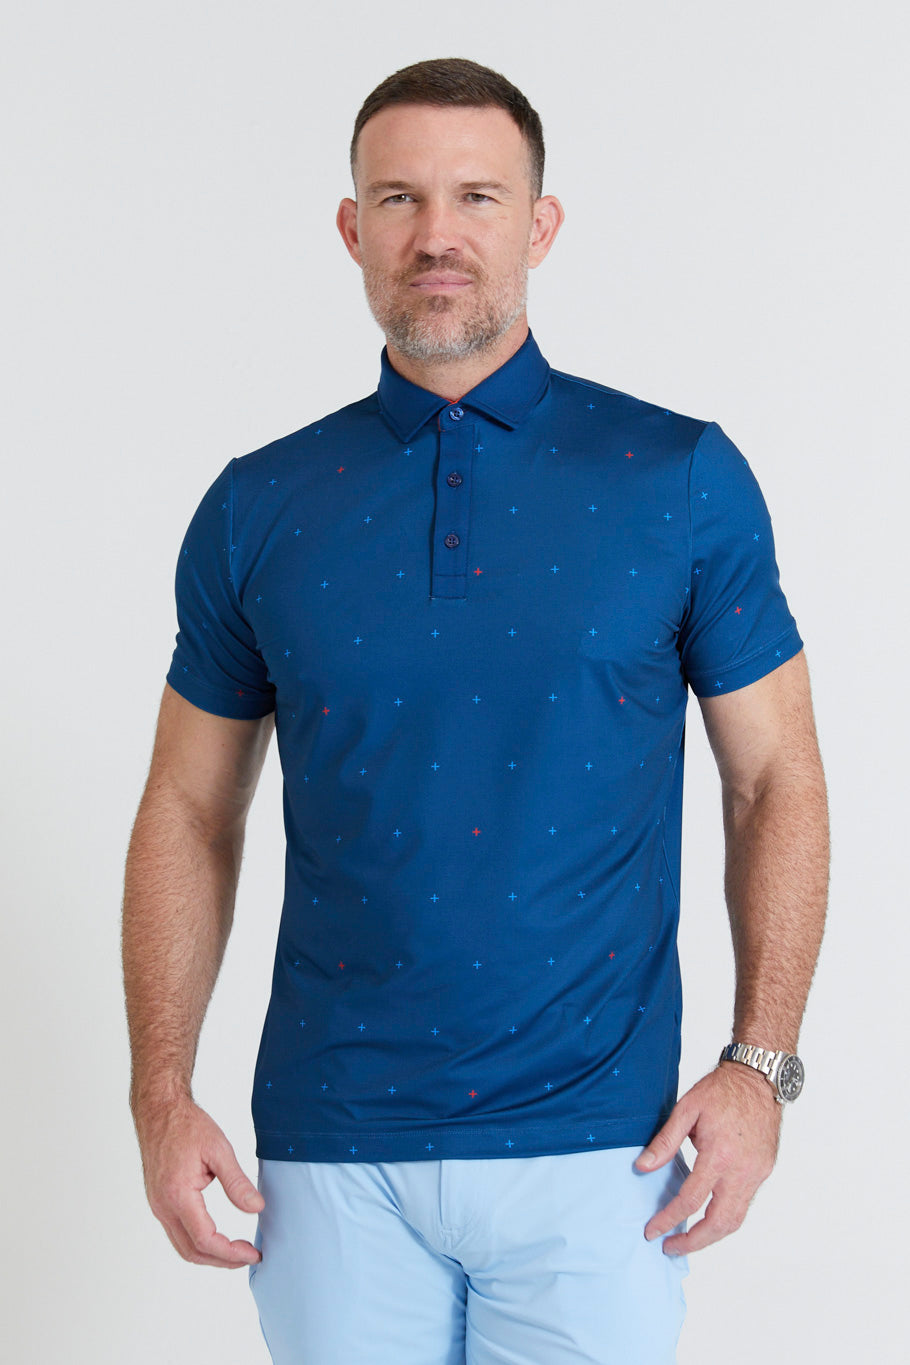 Image of the sheridon polo in admiral ss23